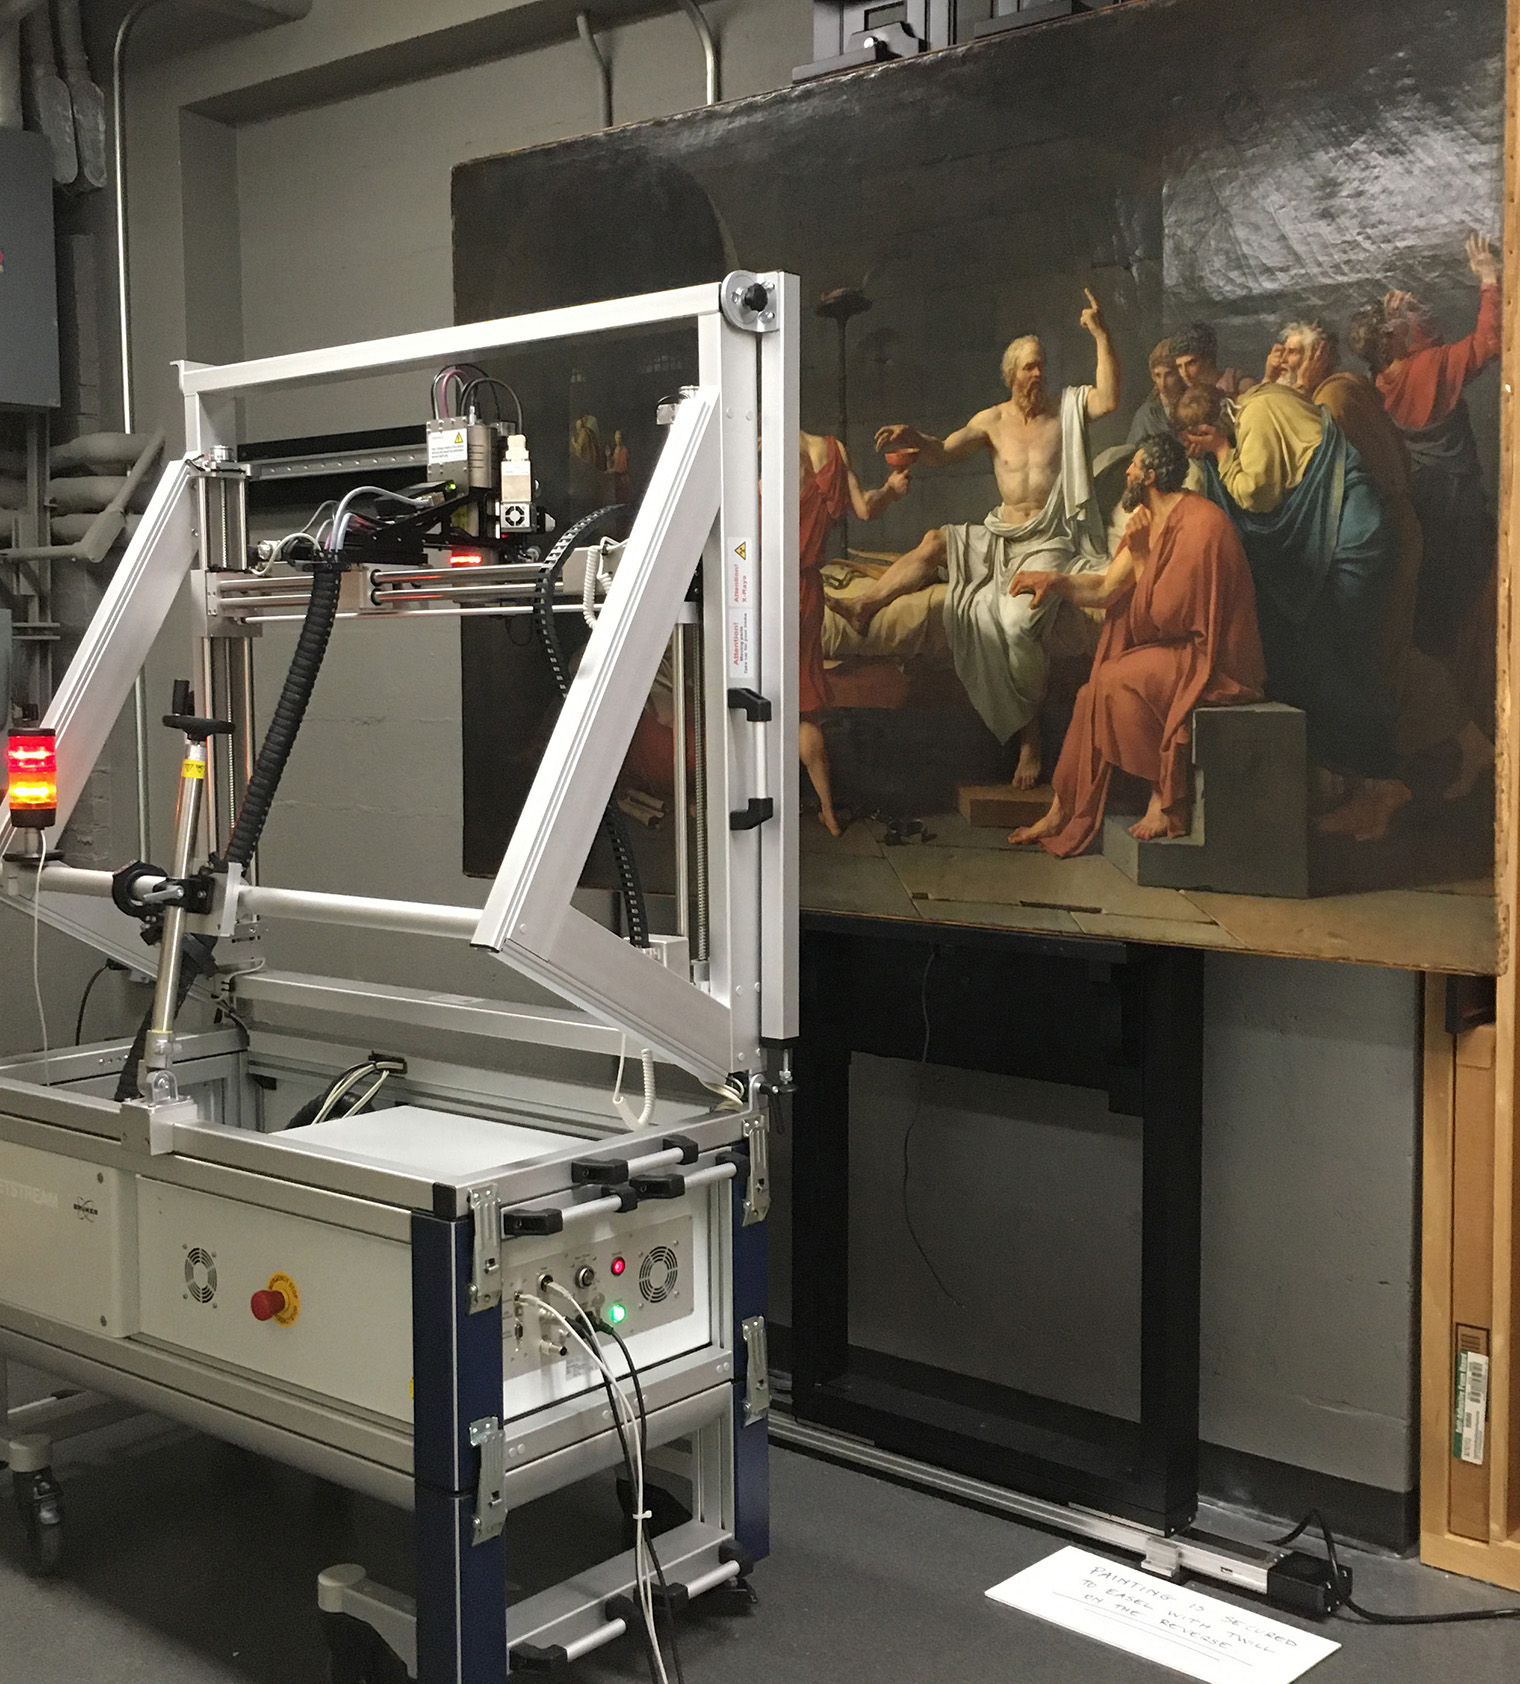 Photo showing The Death of Socrates painting being scanned